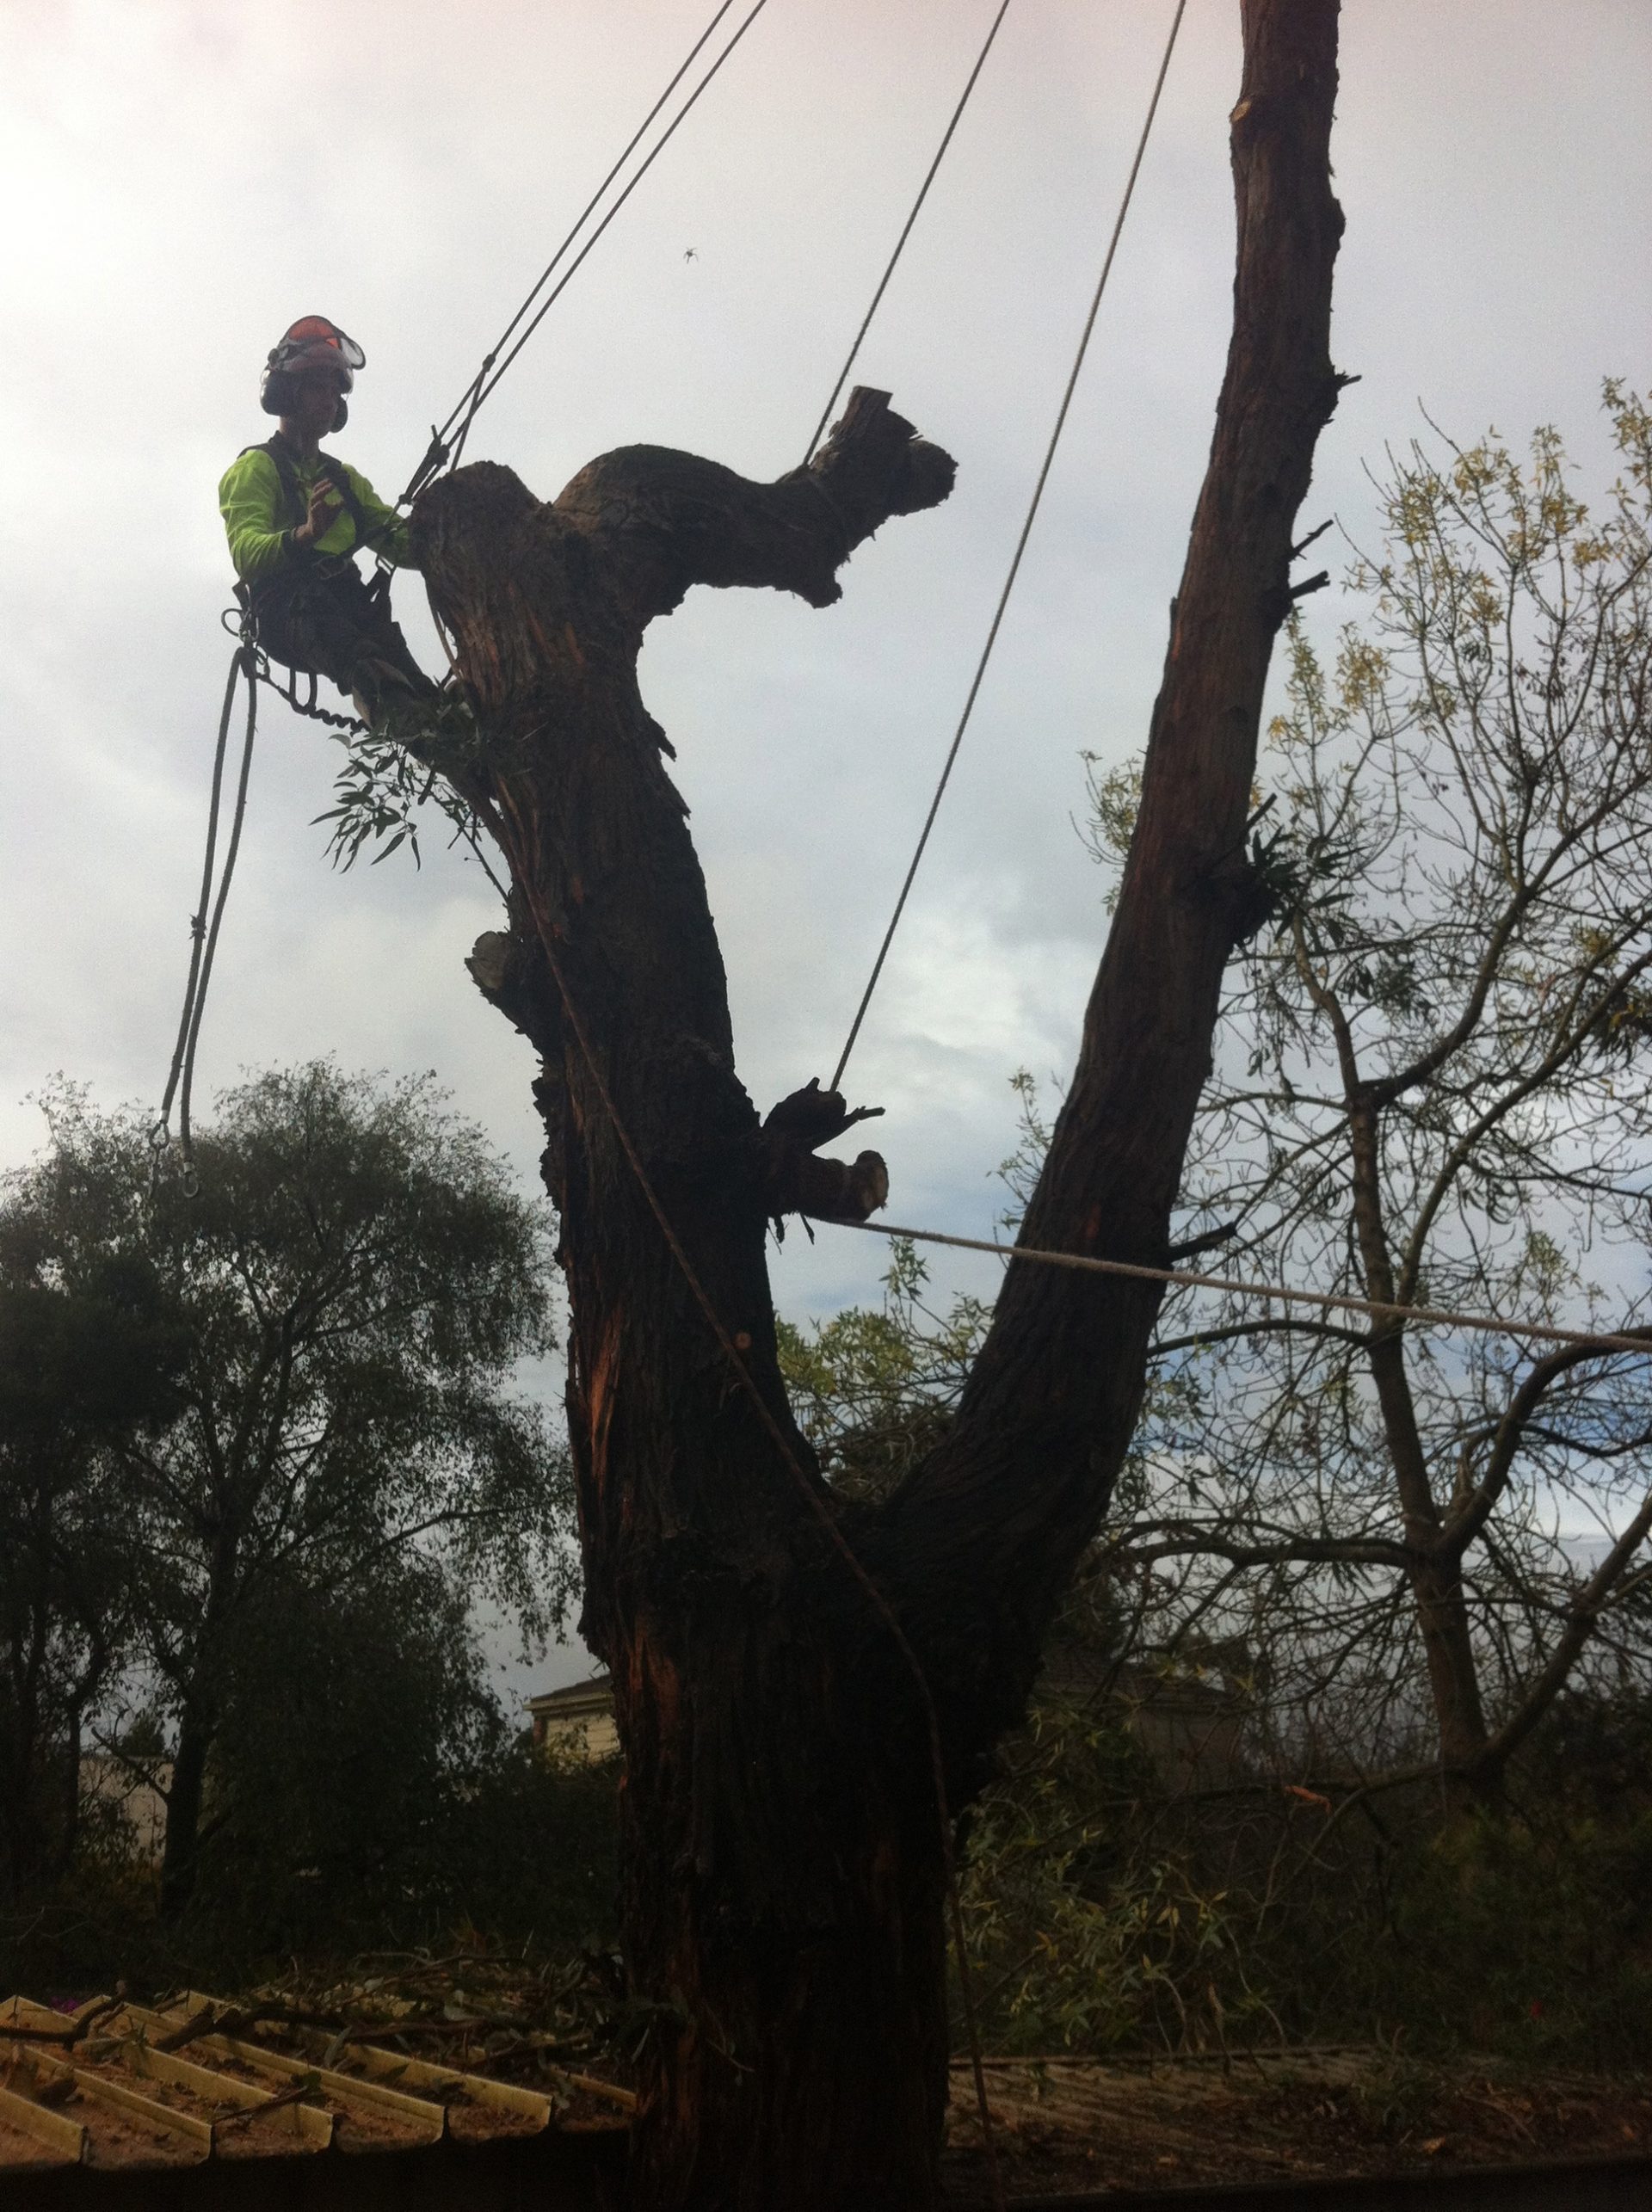 Patterson Lakes Tree Removal - Pruning - Lopping Services